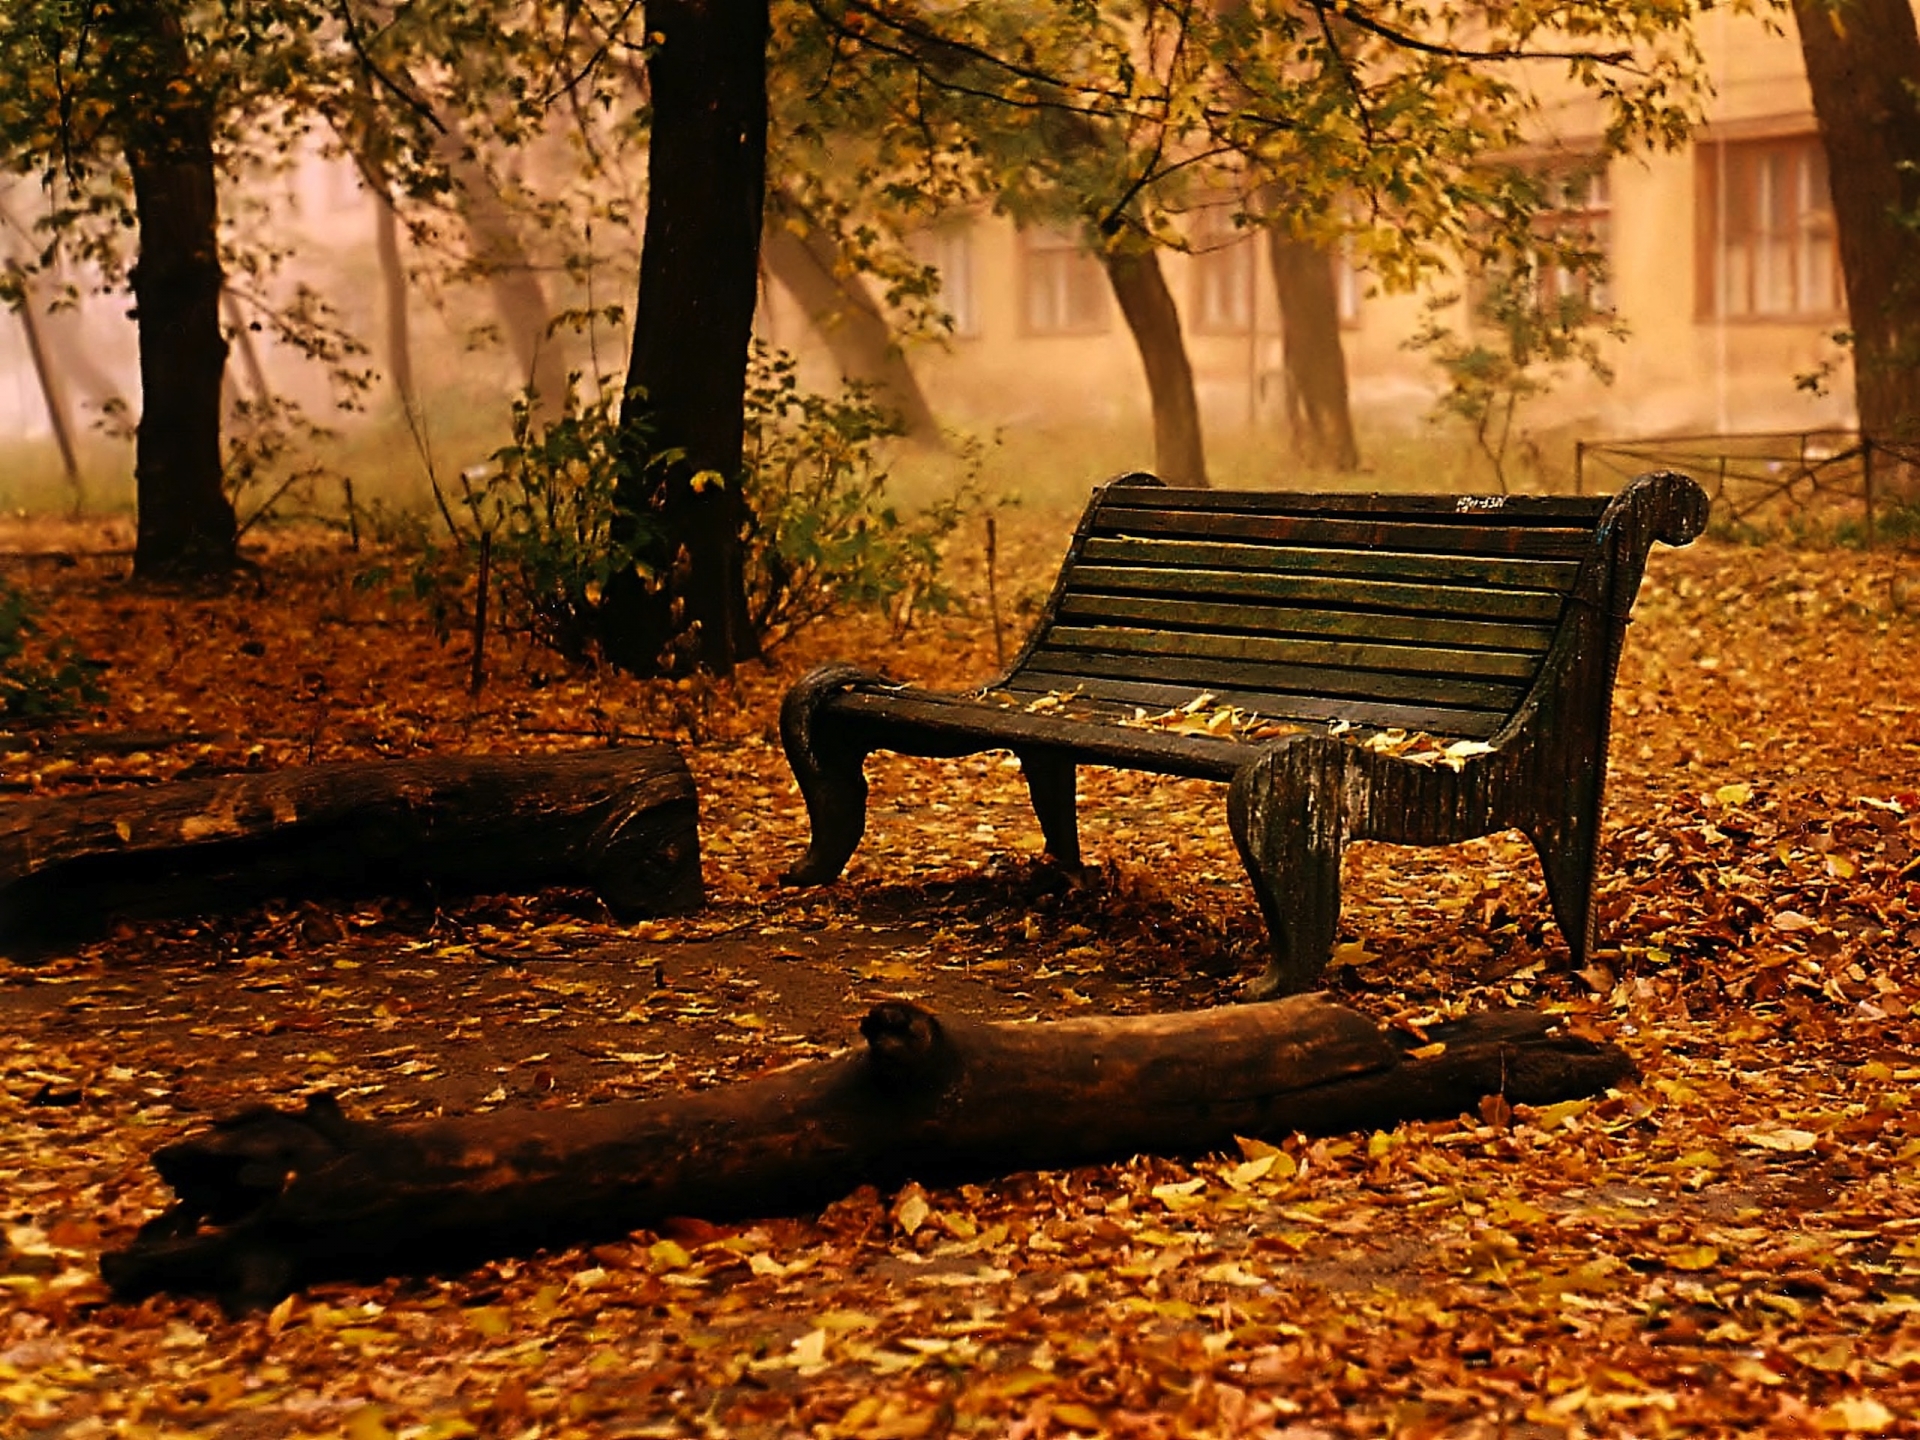 A peaceful bench in a Man Made setting called Come, sit with me.